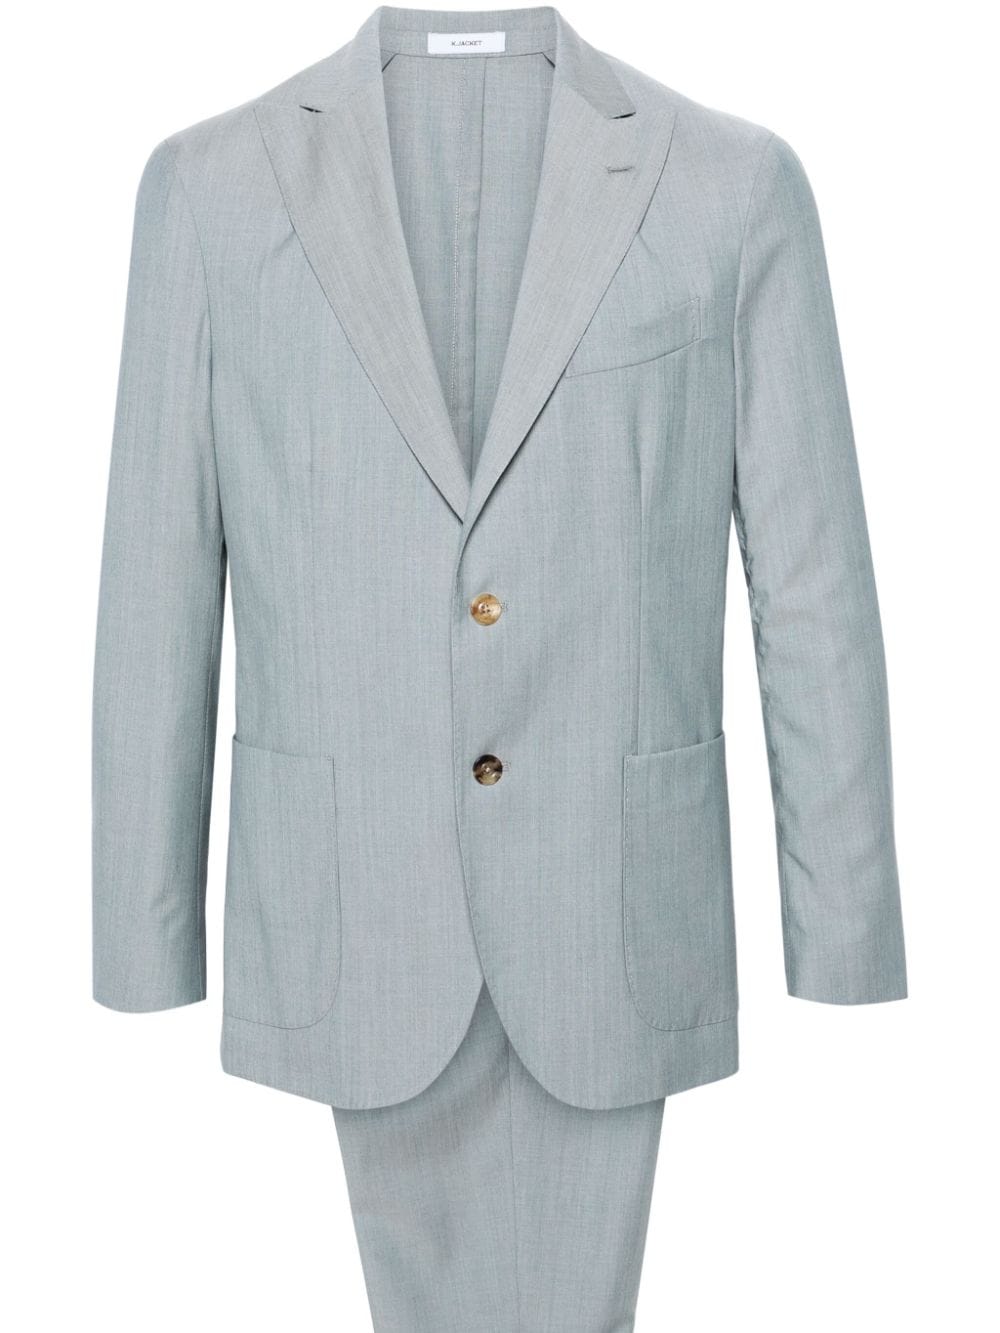 Powder blue single-breasted suit